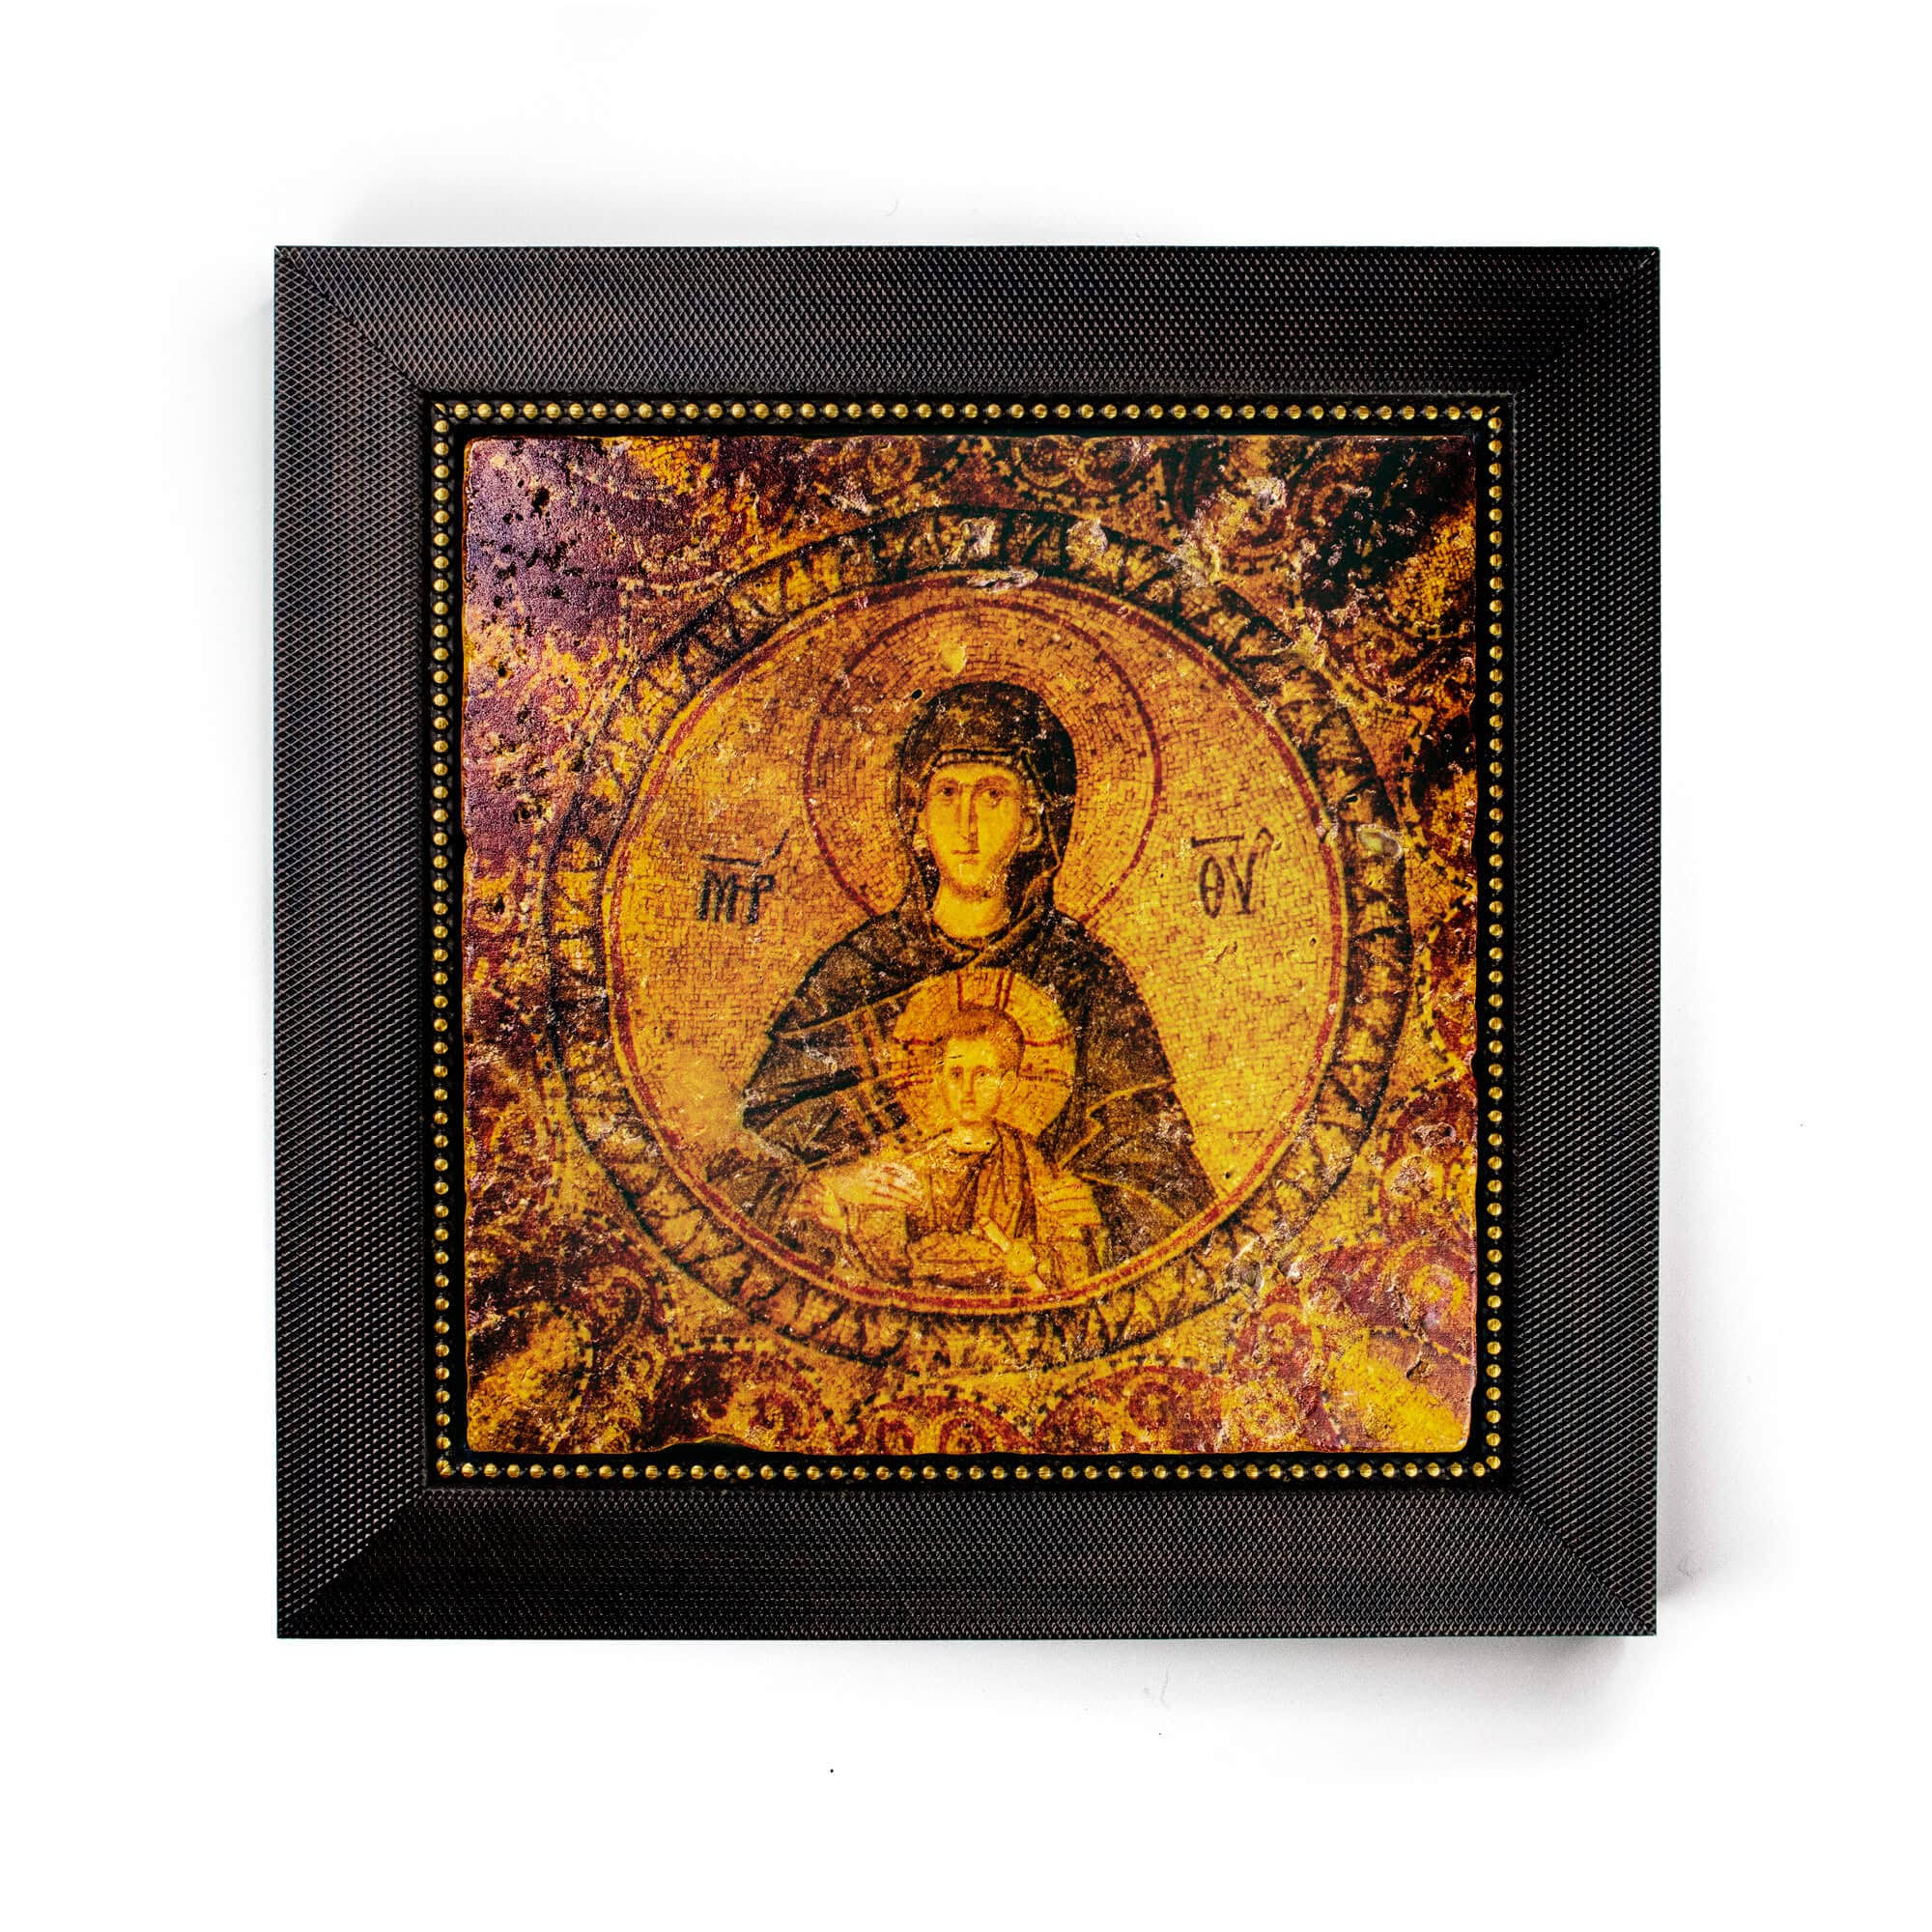 Virgin Mary & Child, Framed Stone Replica of The North Dome Mosaic in The Chora Church in Istanbul, Catholic & Christian Wall Art, Ancient Byzantine